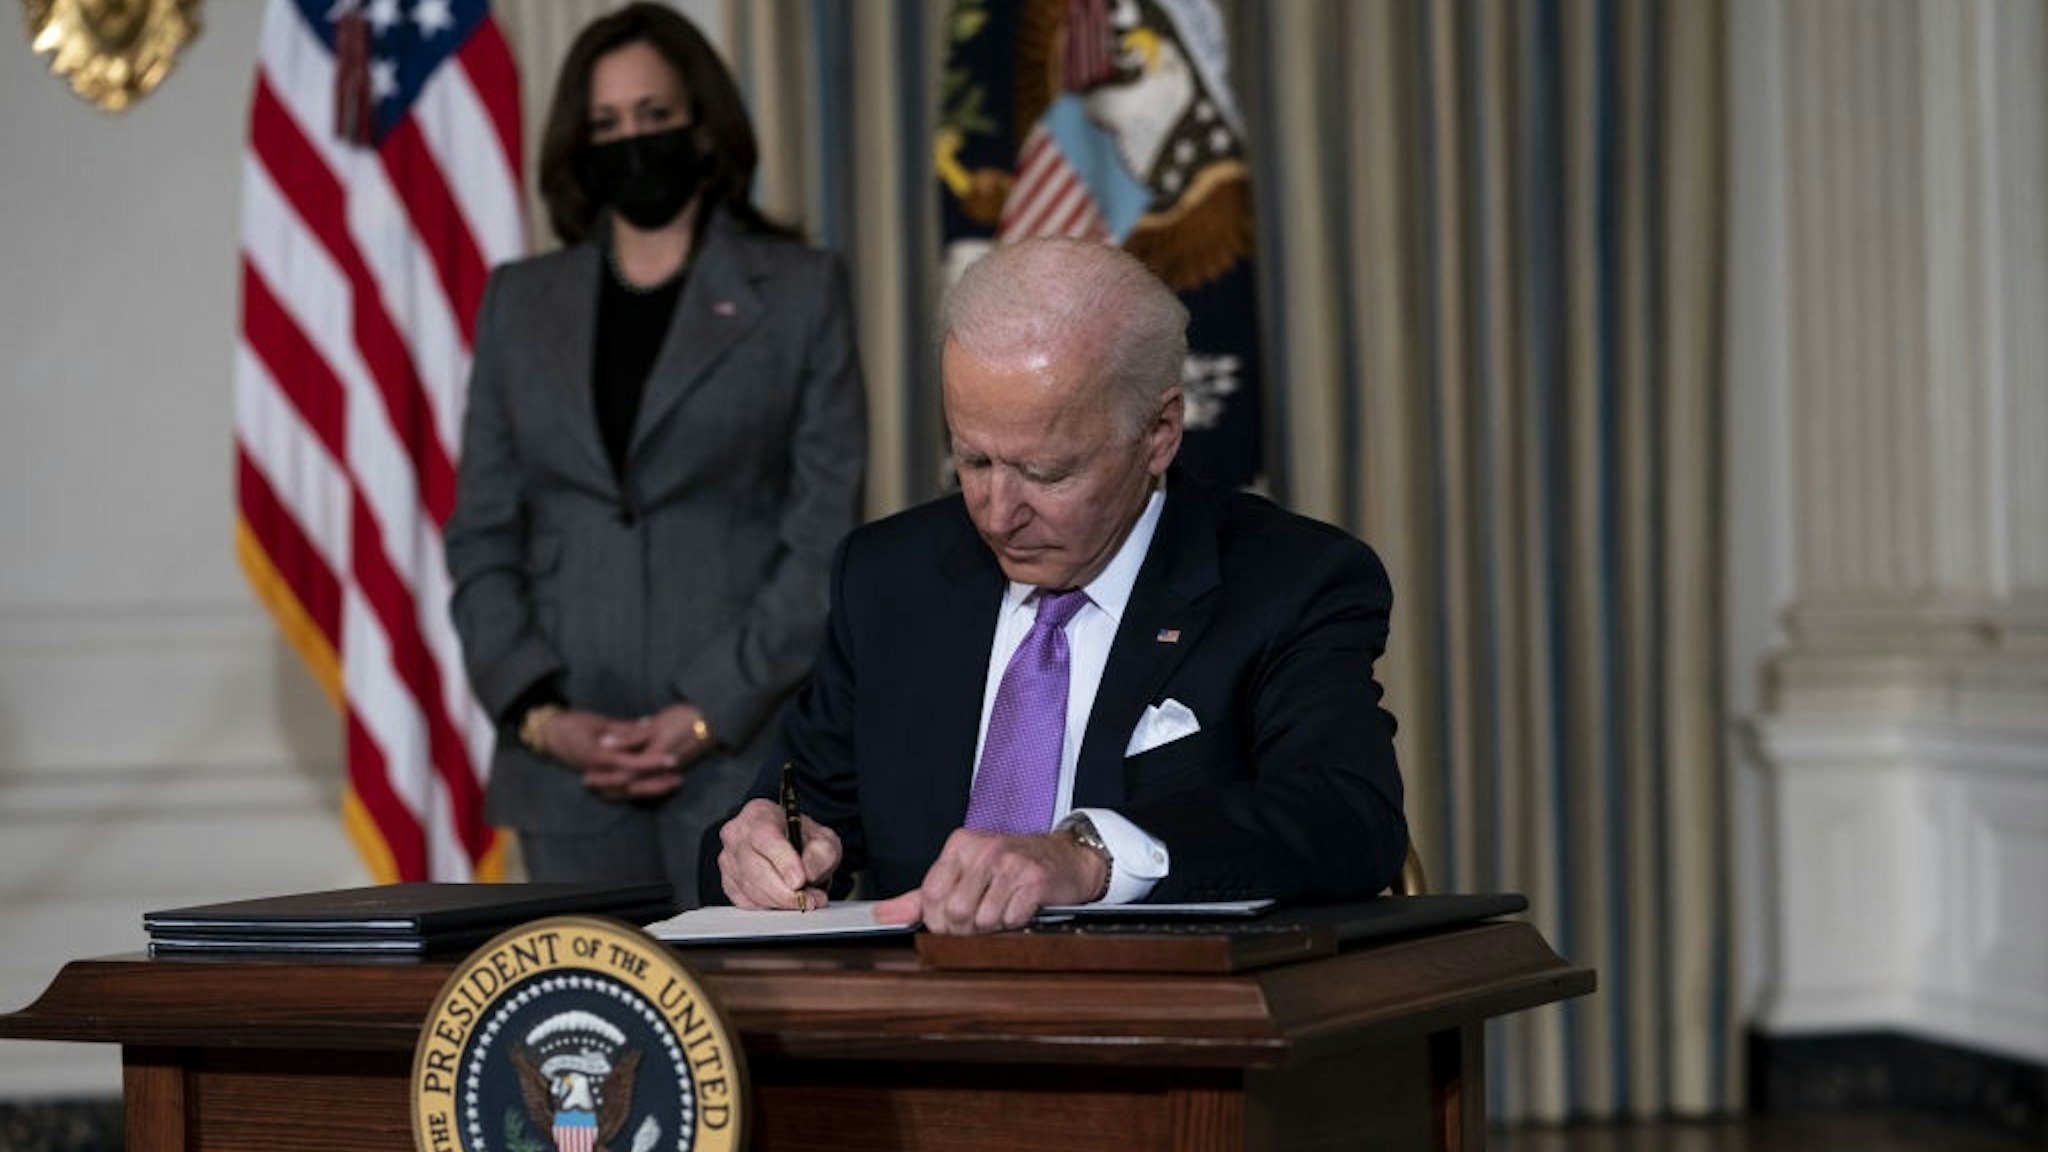 U.S. President Joe Biden signs an executive order in the State Dining Room of the White House in Washington, D.C., U.S., on Tuesday, Jan. 26, 2021.